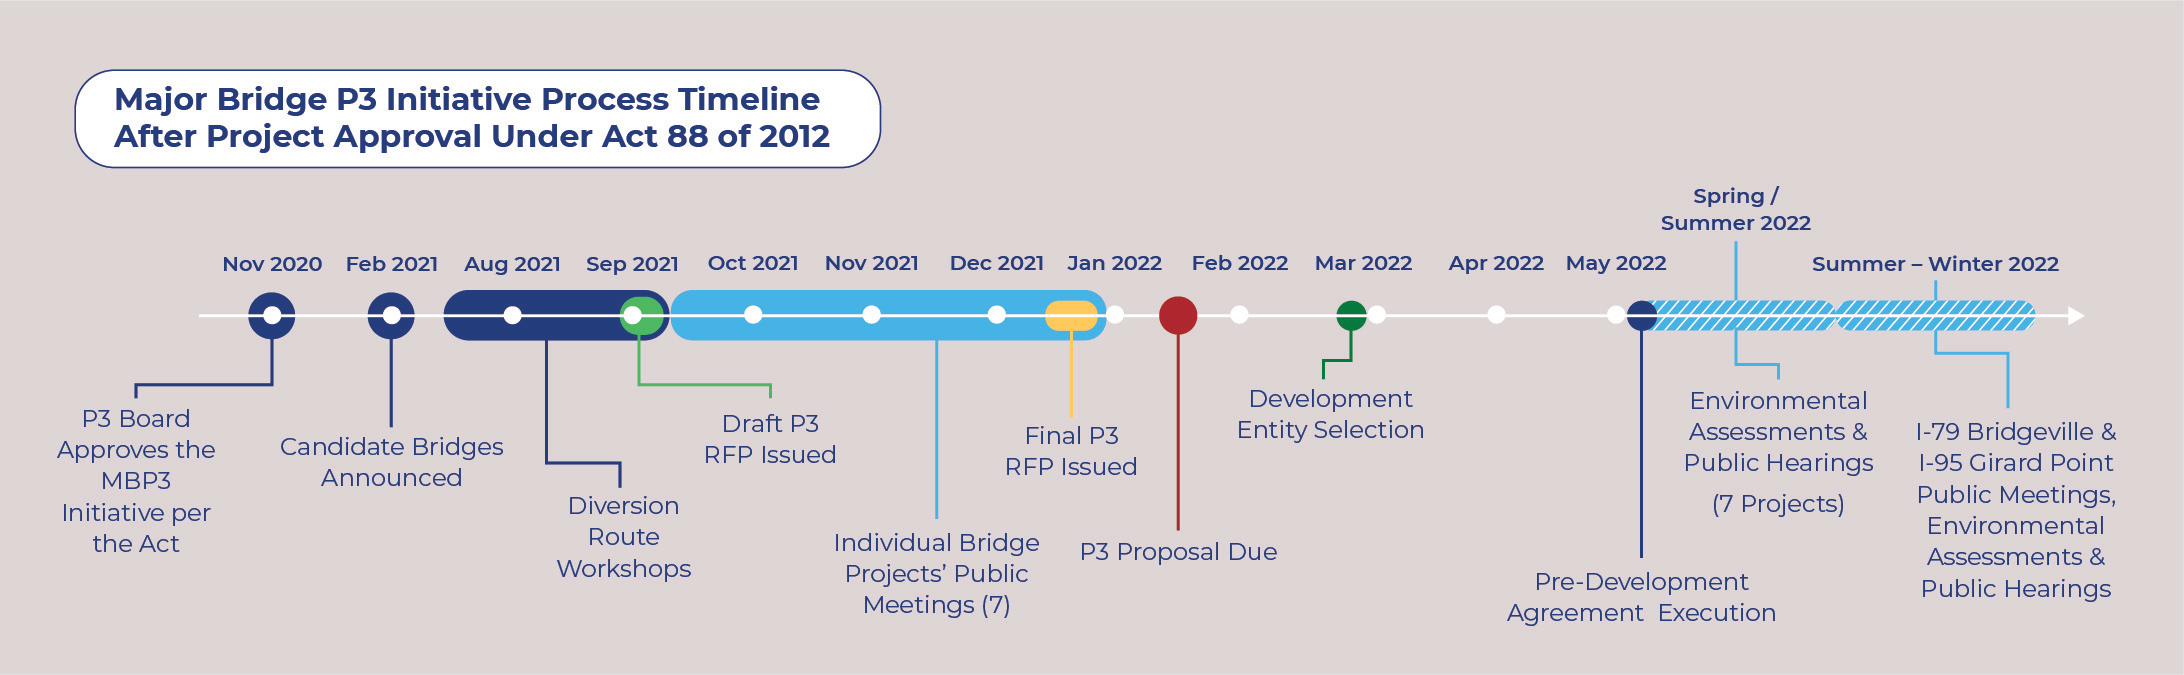 Timeline of Major Bridge P3 process. The P3 request for qualifications was issued in July 2021. Diversion route workshops were  held August to mid-September 2021. The draft P3 request for proposals was issued in September 2021. Individual bridge projects' public meetings were held October 2021-January 2022. A final P3 RFP was issued in mid-December 2021. P3 proposals were due in mid-January. The seletion of a development entity is planned for the end of February 2022. A predevelopment agreement (PDF) commercial close is planned for end of March 2022. A public hearing for I-83 South Bridge, as well as public meetings for I-79 Bridgeville and I-95 Girard Point are planned for the spring/summer of 2022.